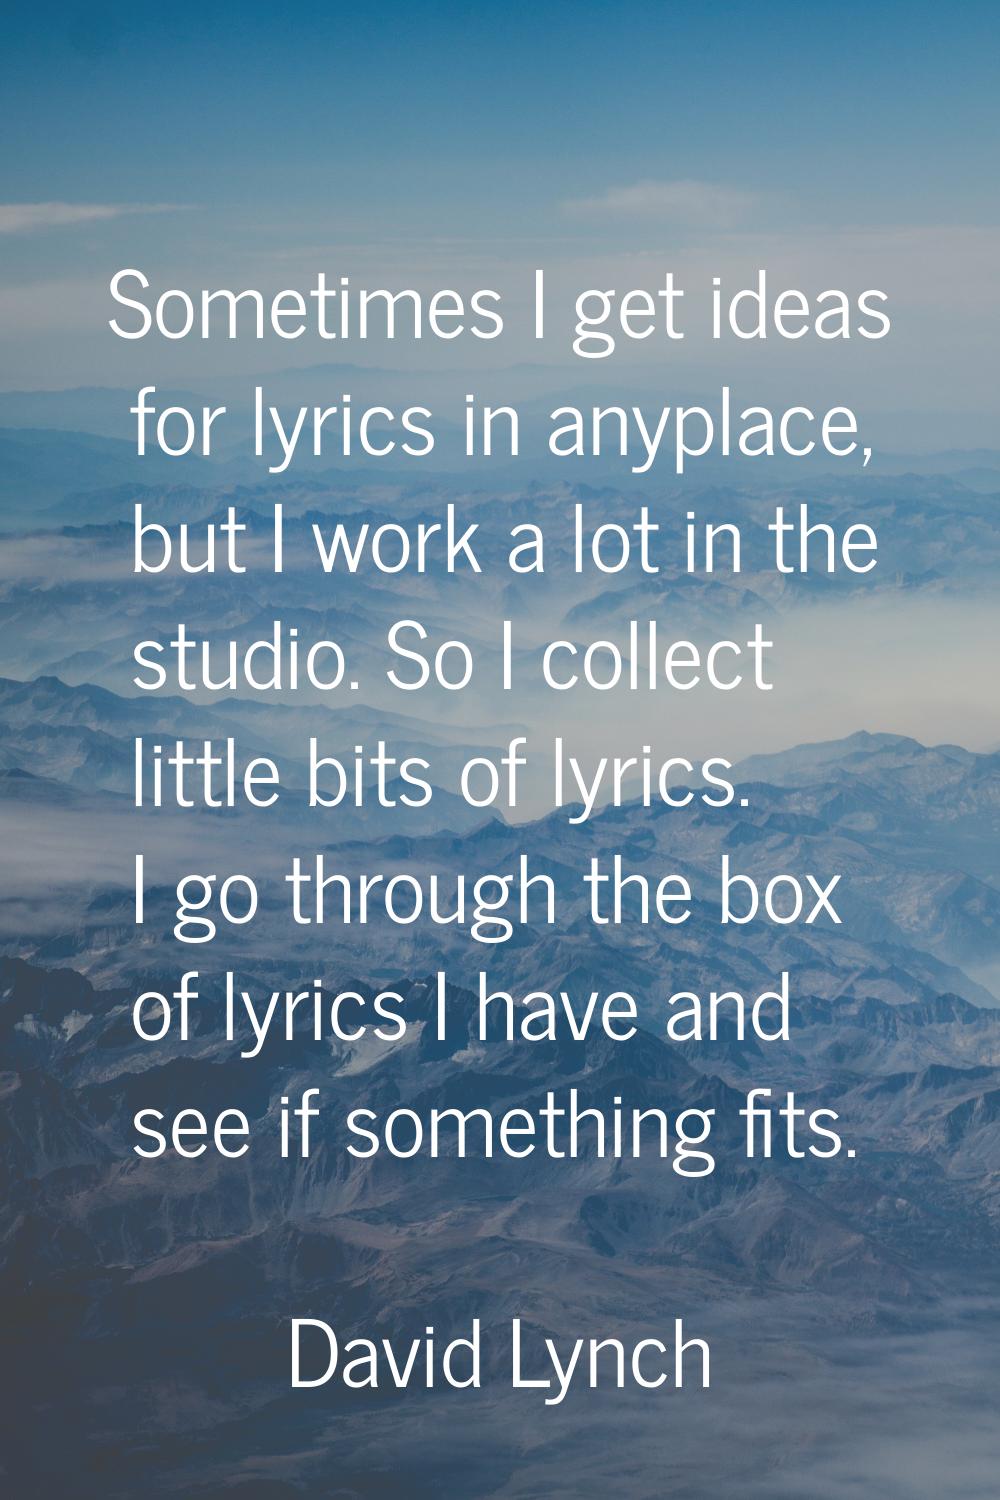 Sometimes I get ideas for lyrics in anyplace, but I work a lot in the studio. So I collect little b